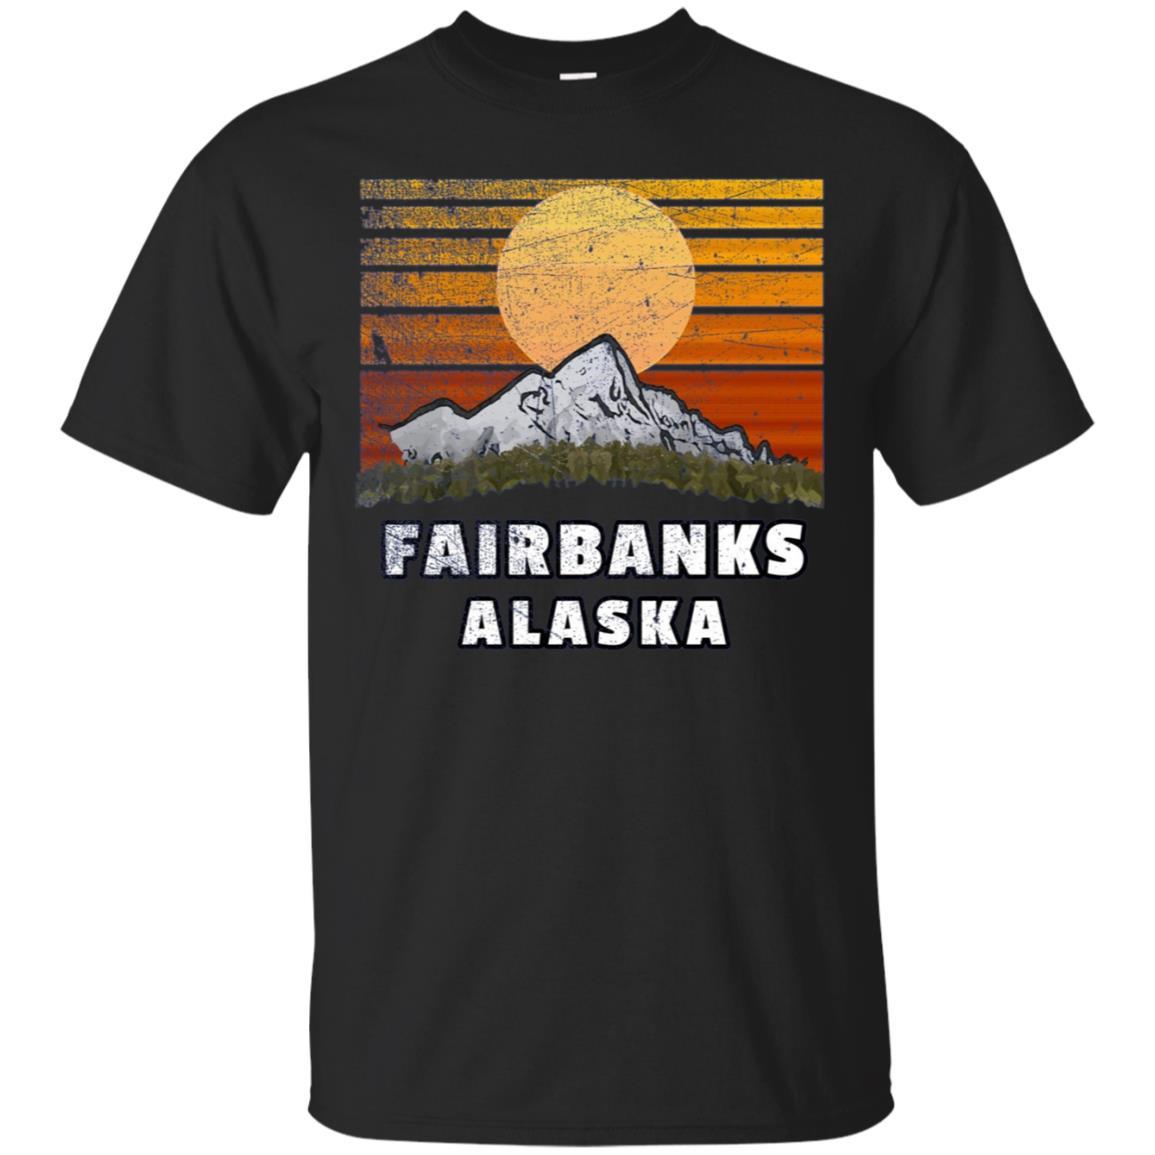 Check Out This Awesome Fairbanks Alaska Shirt With Mountain Scenery